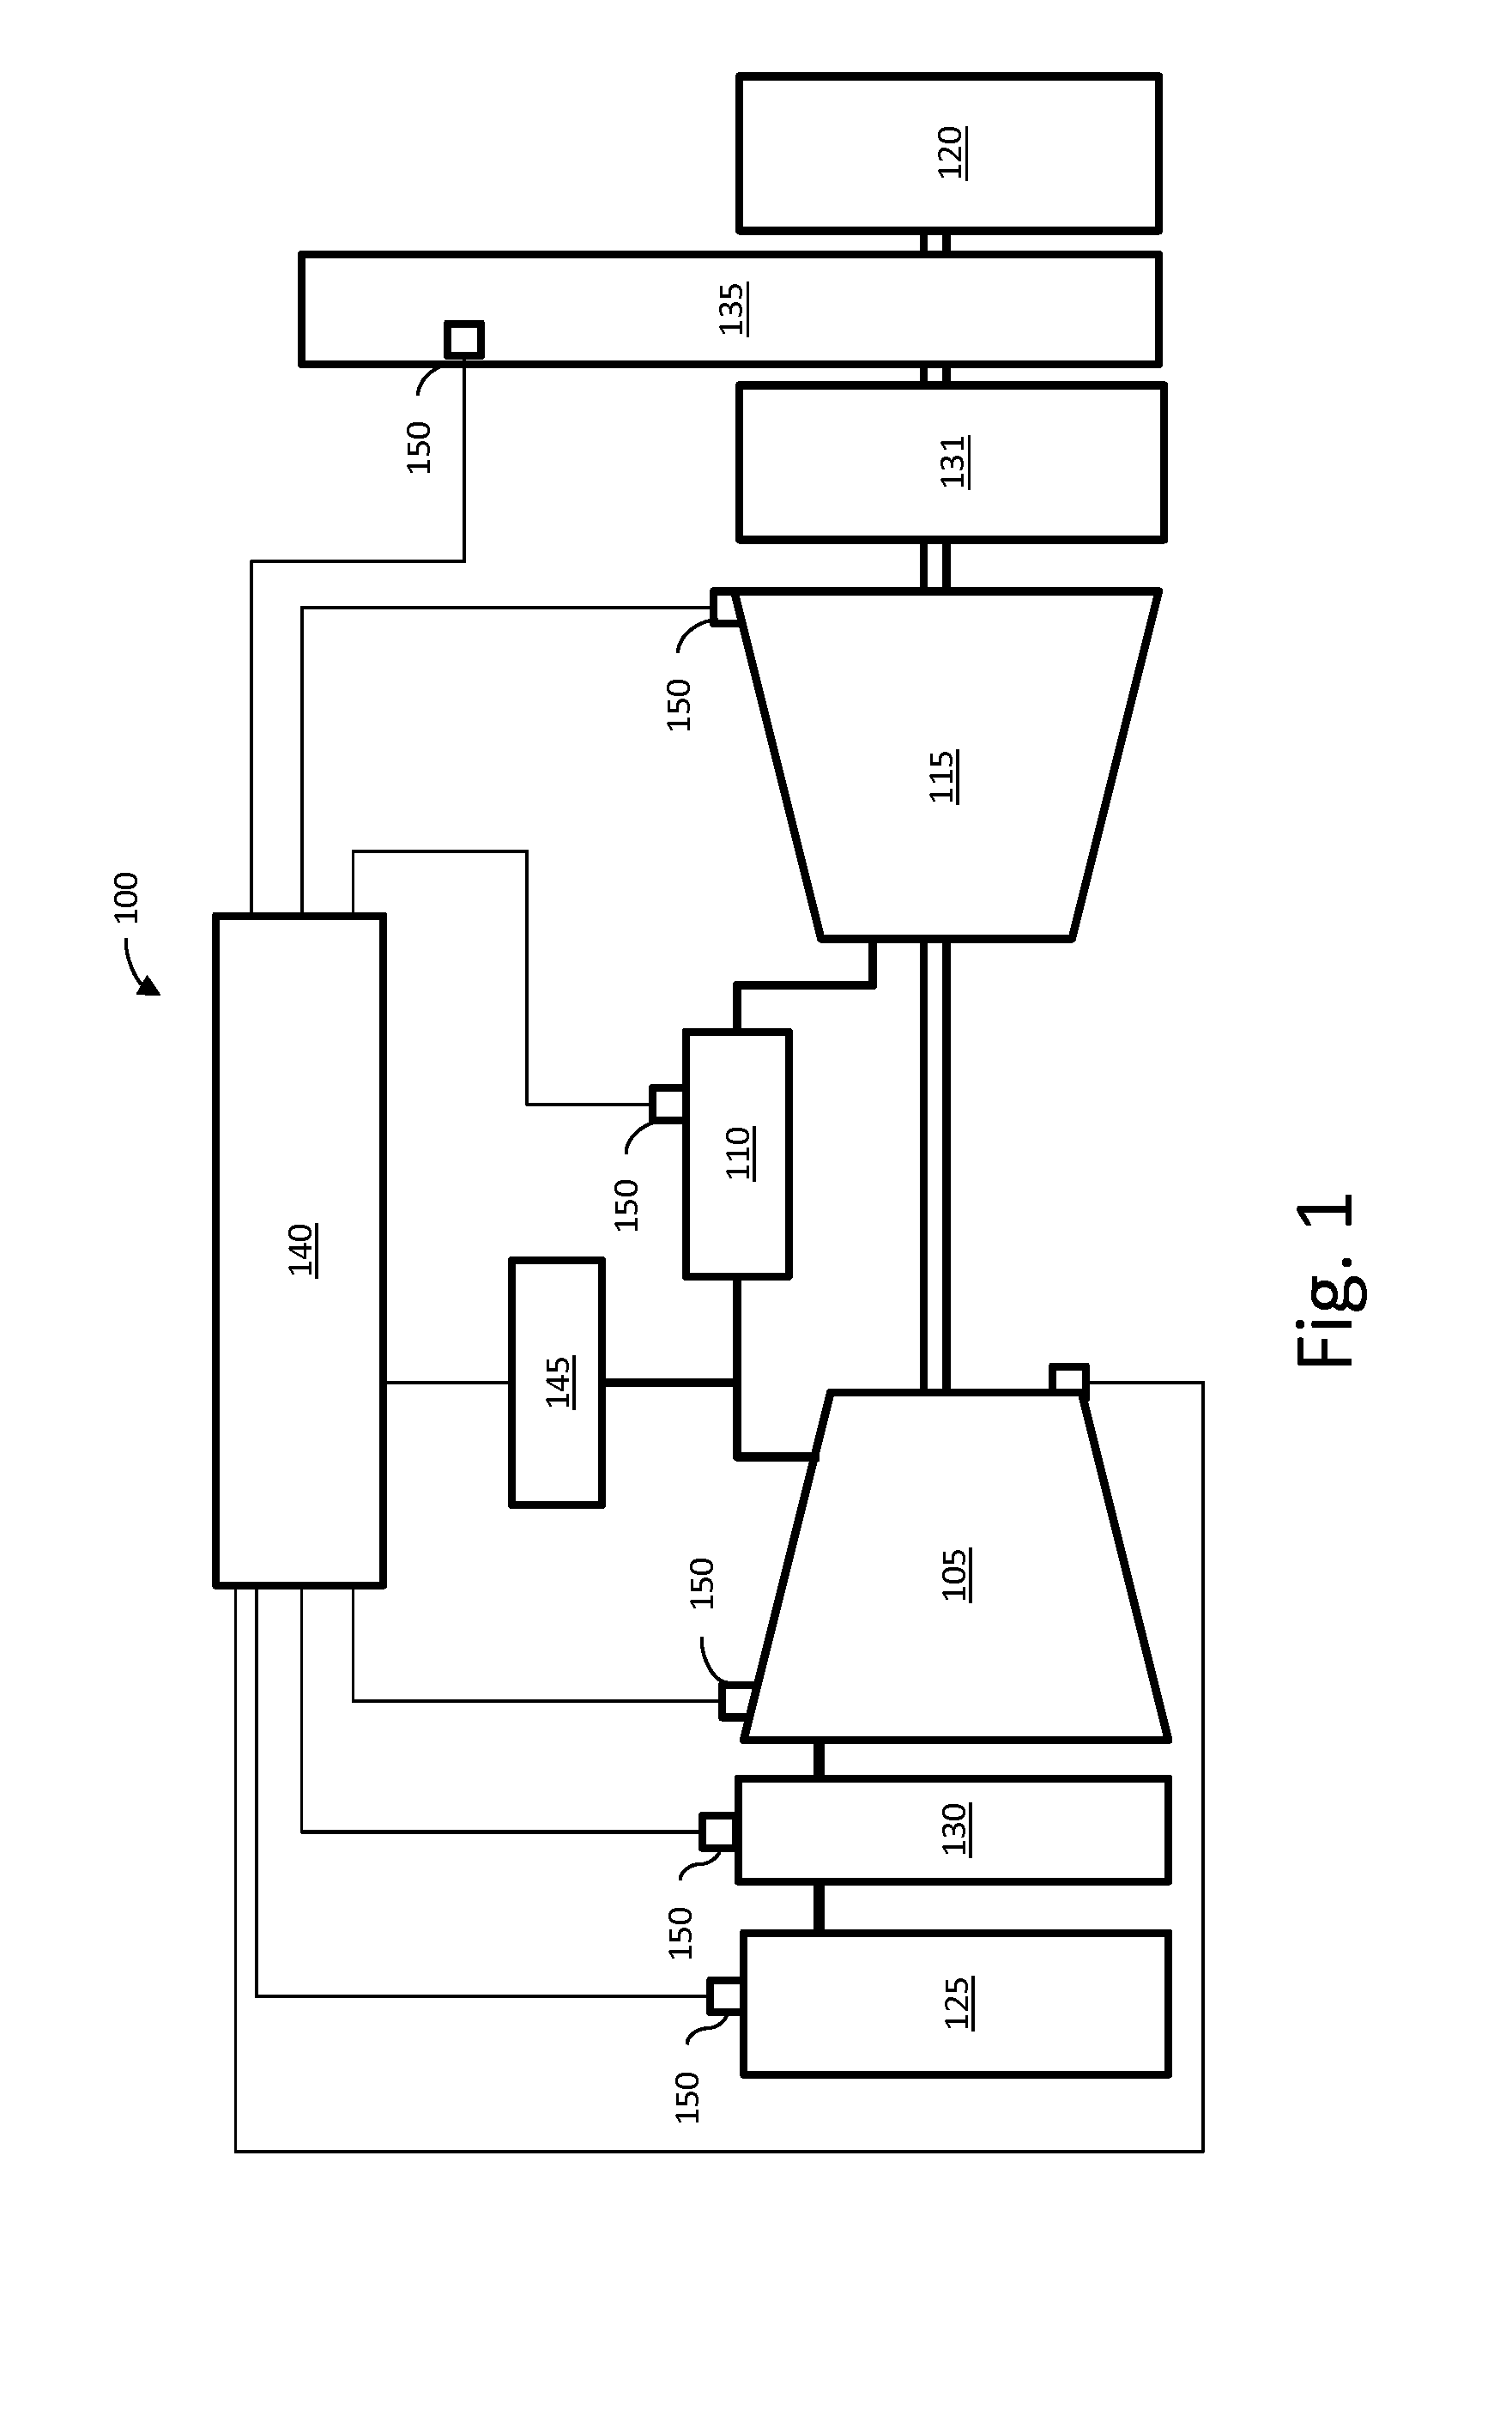 Systems and Methods for Bypassing a Coalescer in a Gas Turbine Inlet